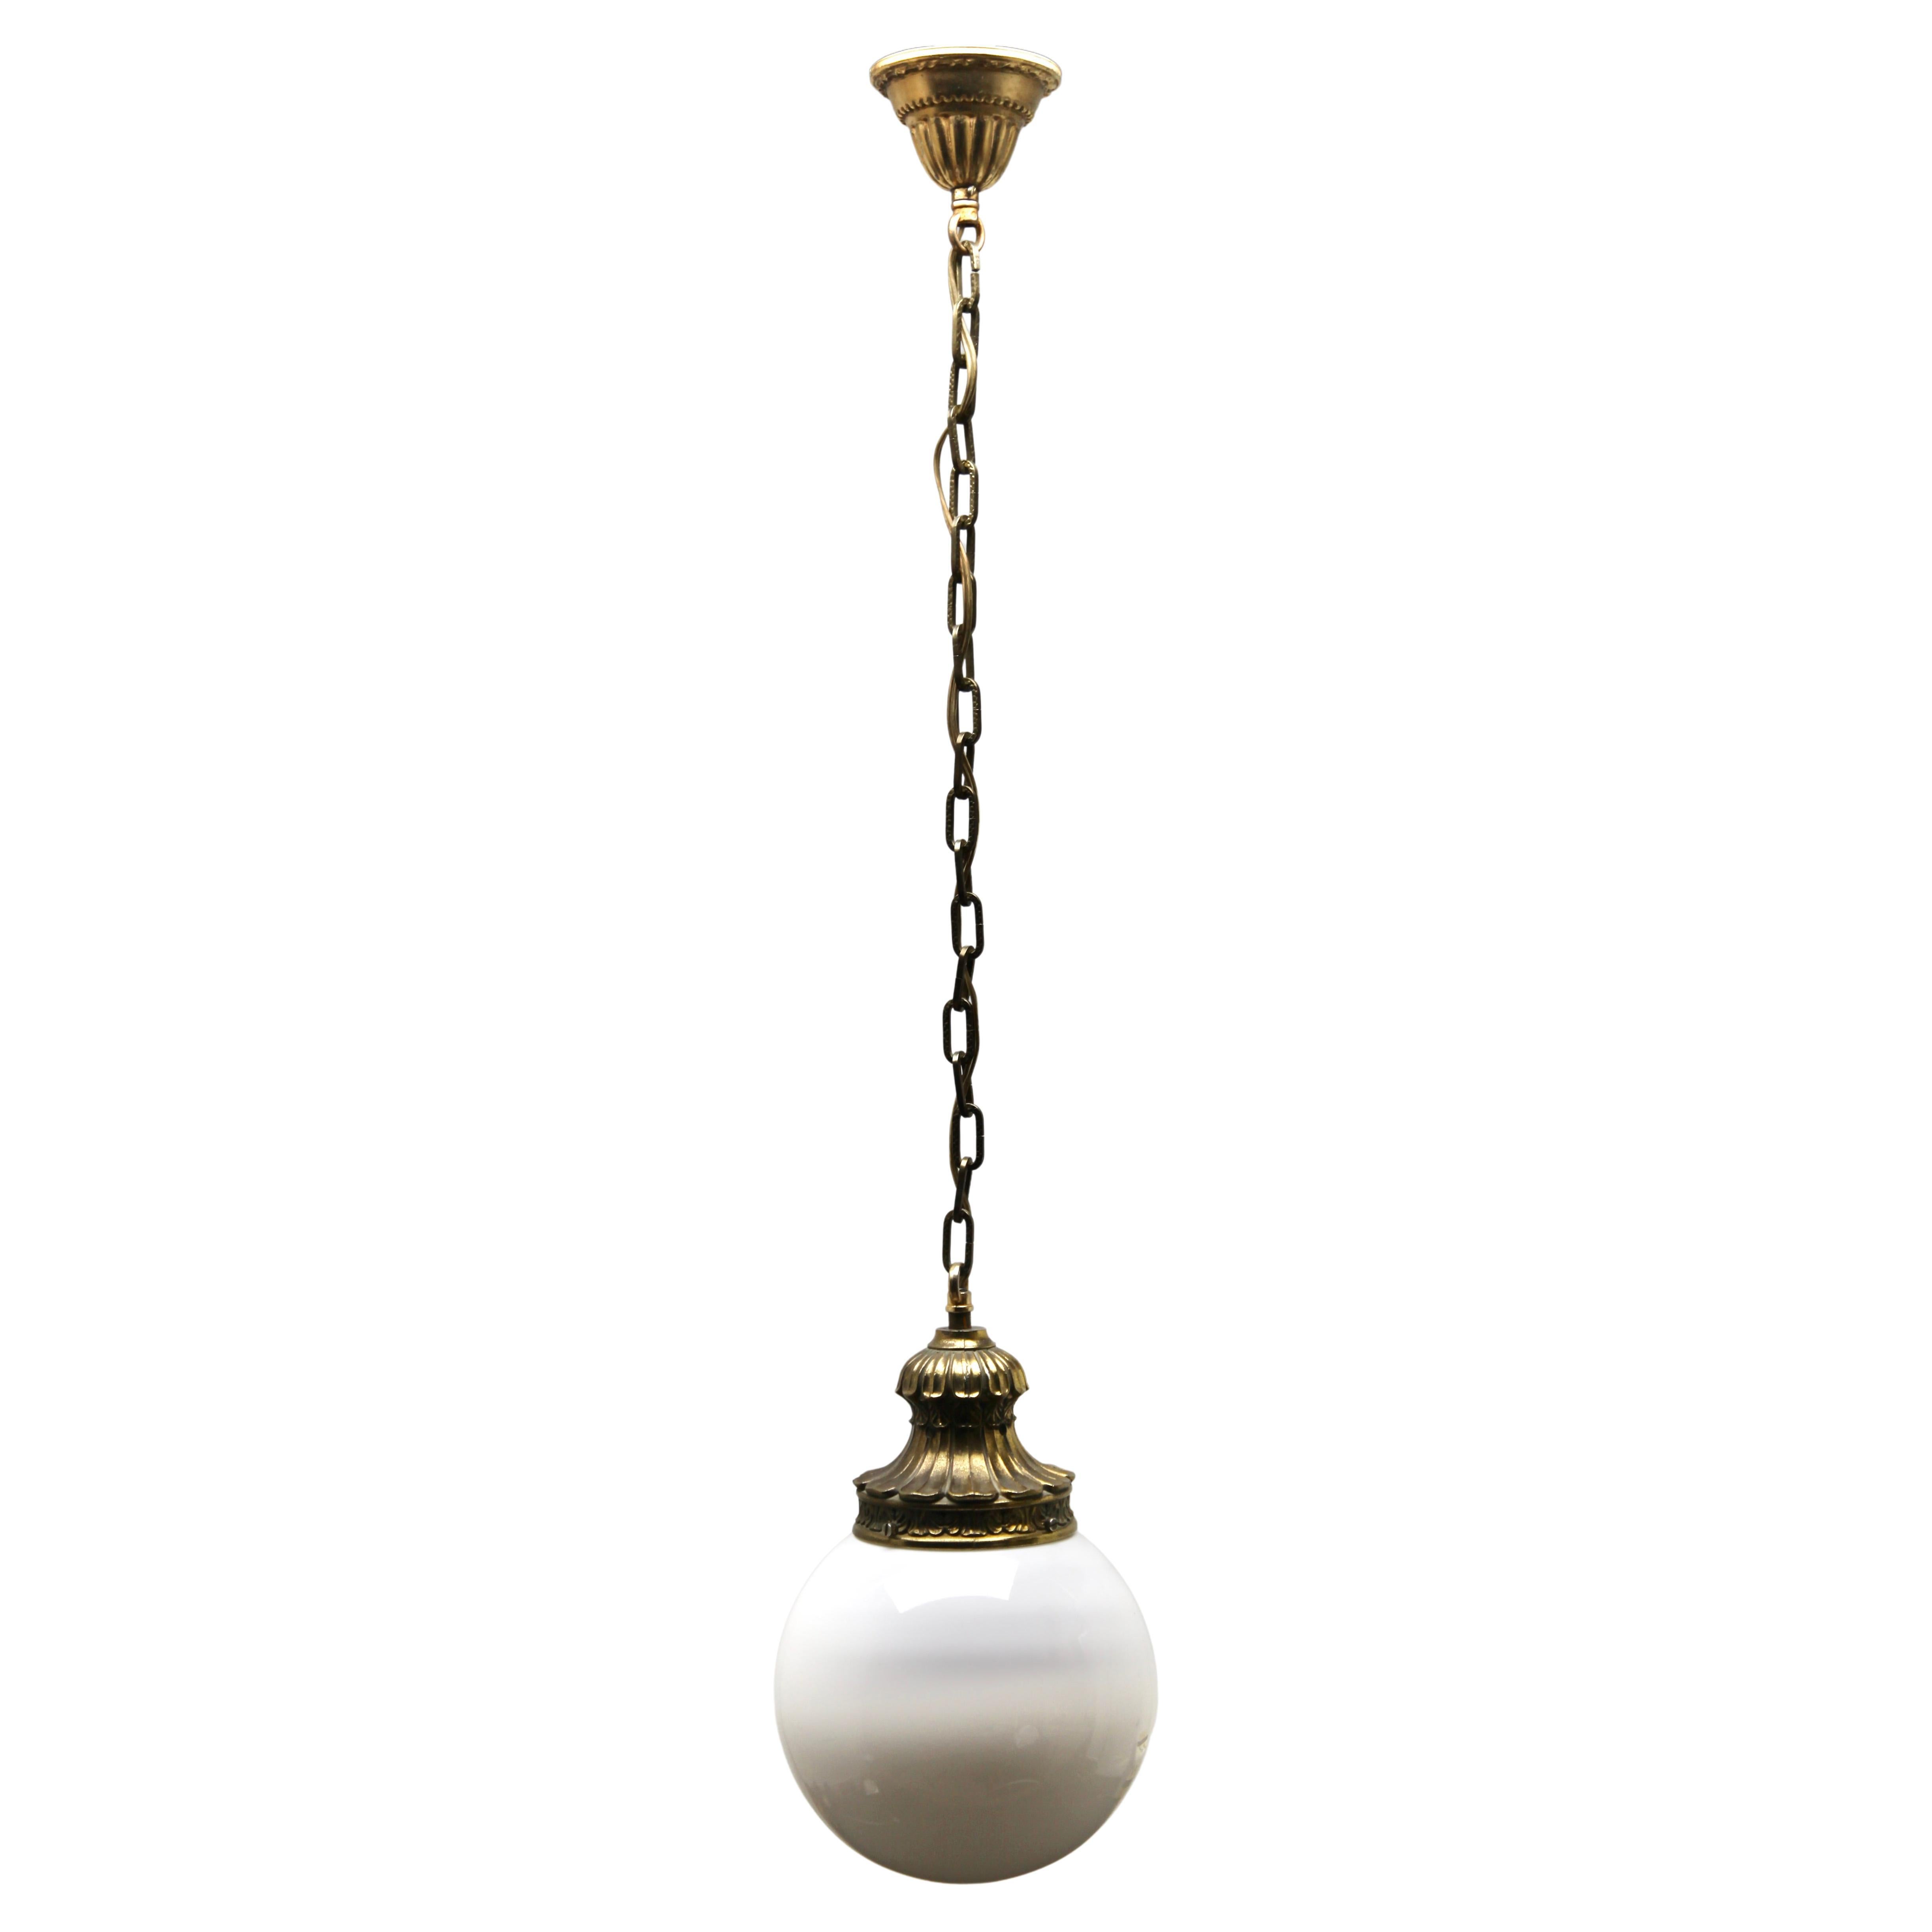 Pendant Lamp with a Opaline Shade, 1930s, Netherlands